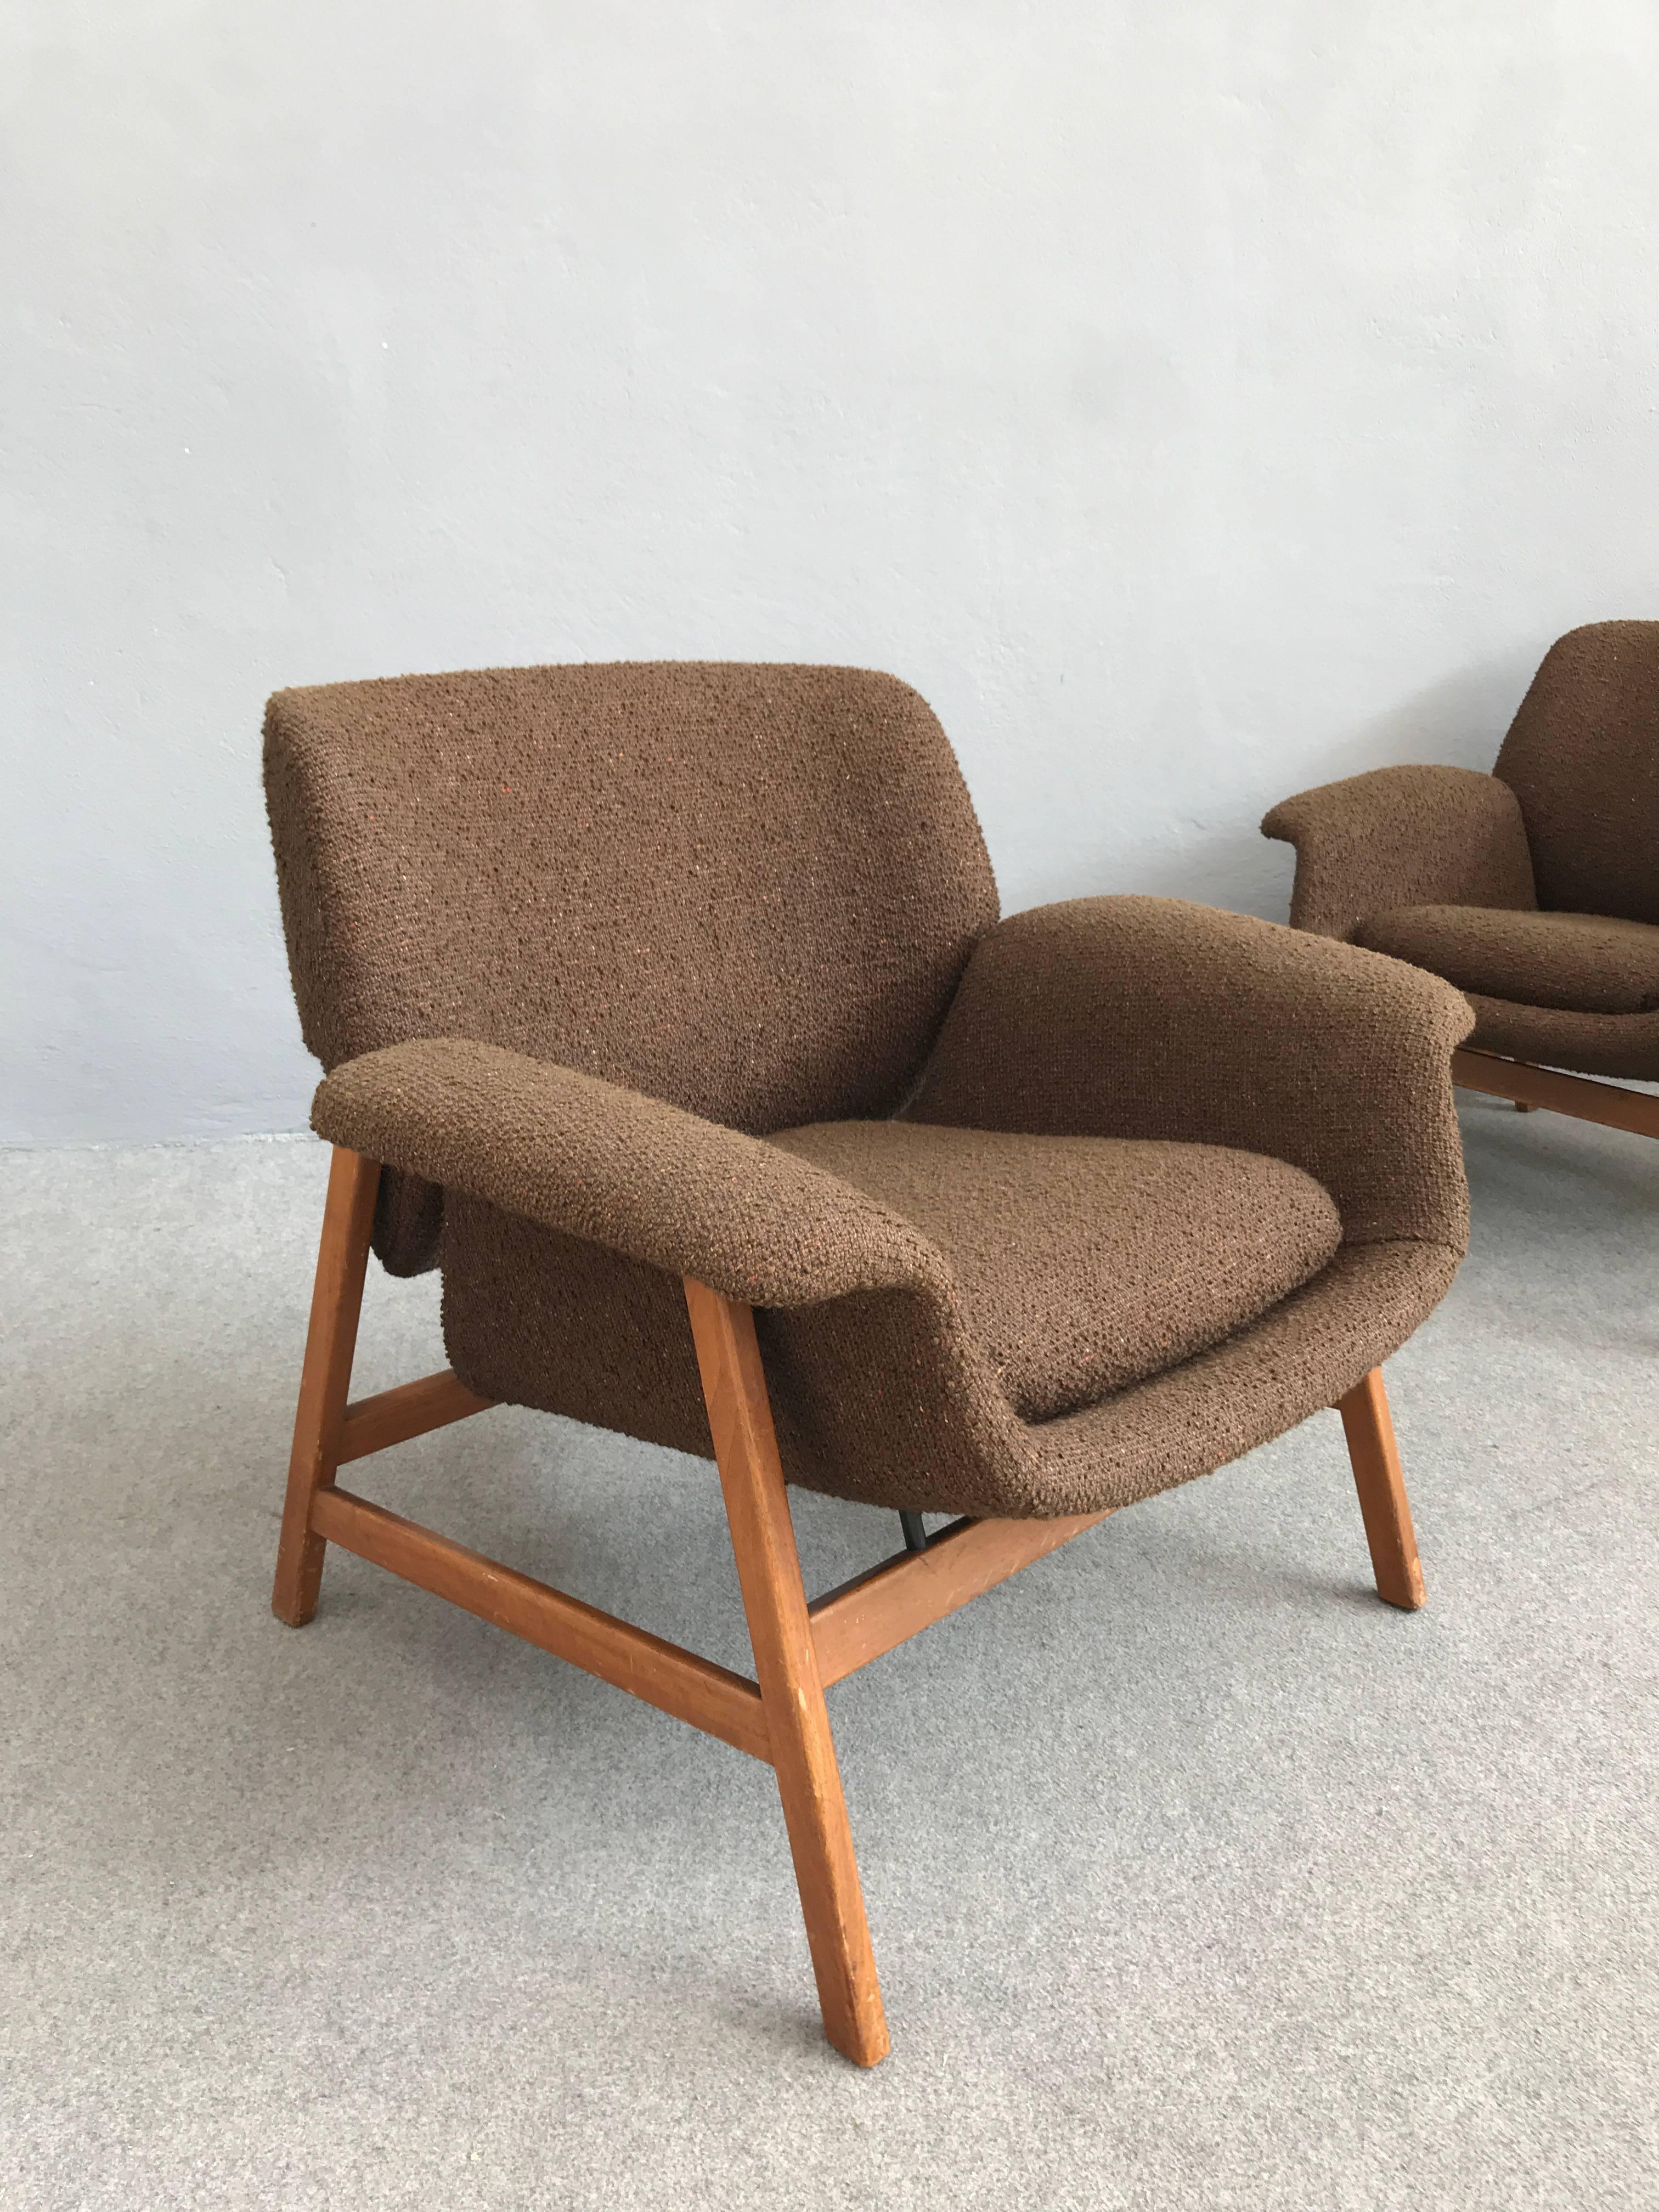 Mid-20th Century Iconic Pair of Armchairs 849 by Gianfranco Frattini for Cassina